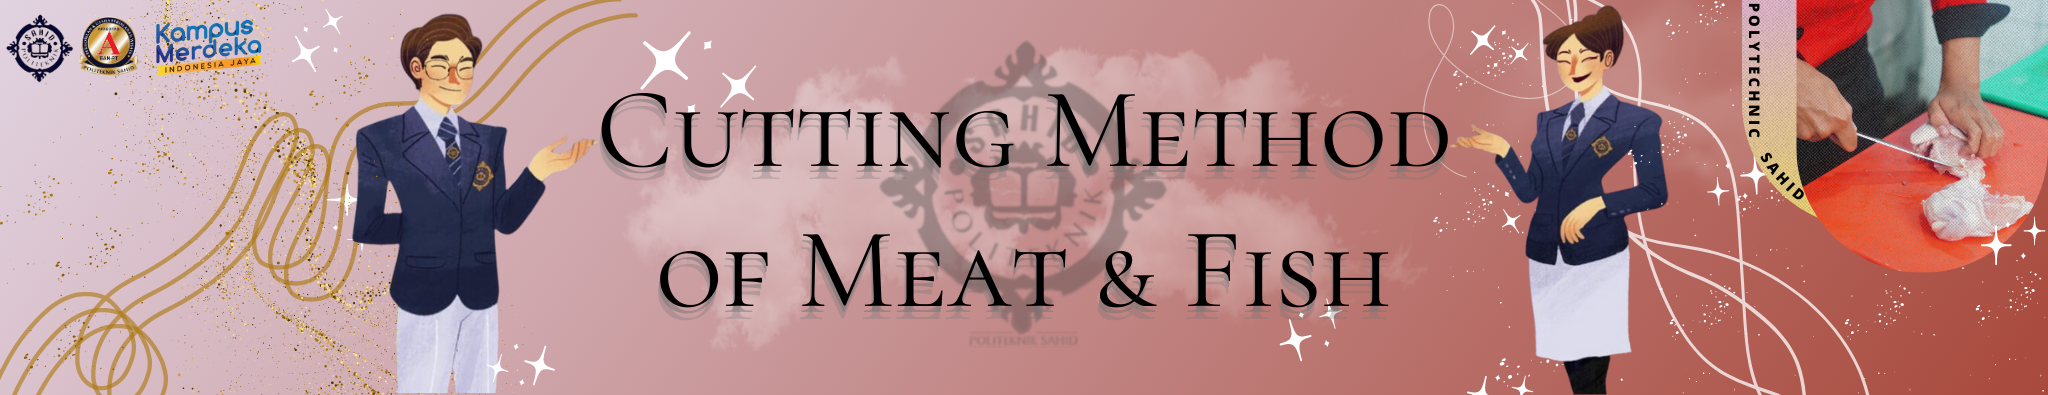 Cutting Method of Meat & Fish